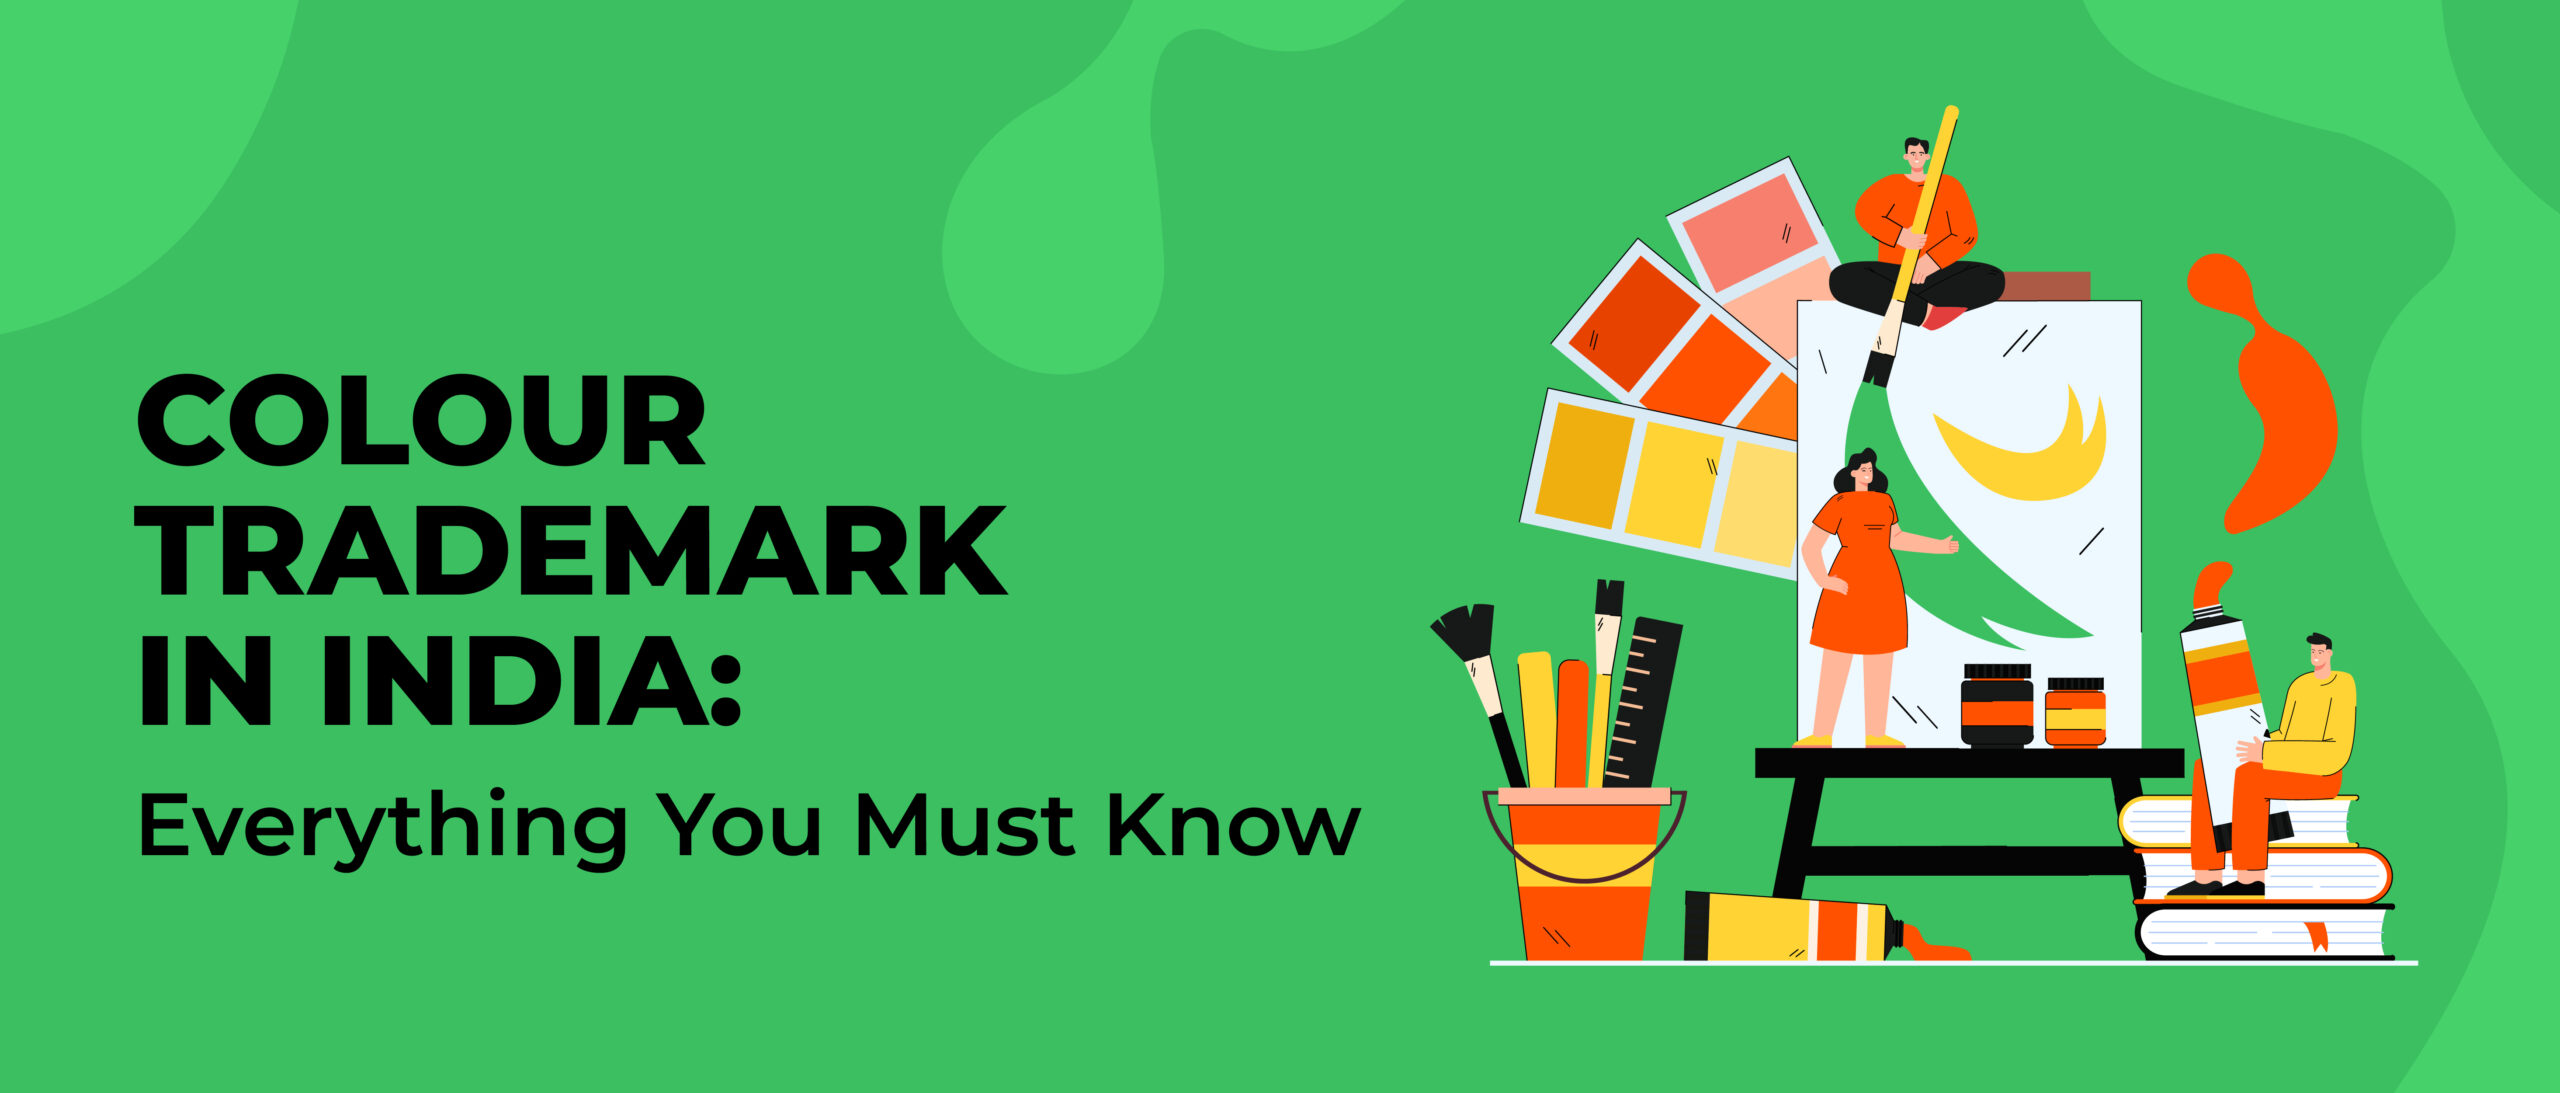 Colour Trademark In India: Everything You Must Know